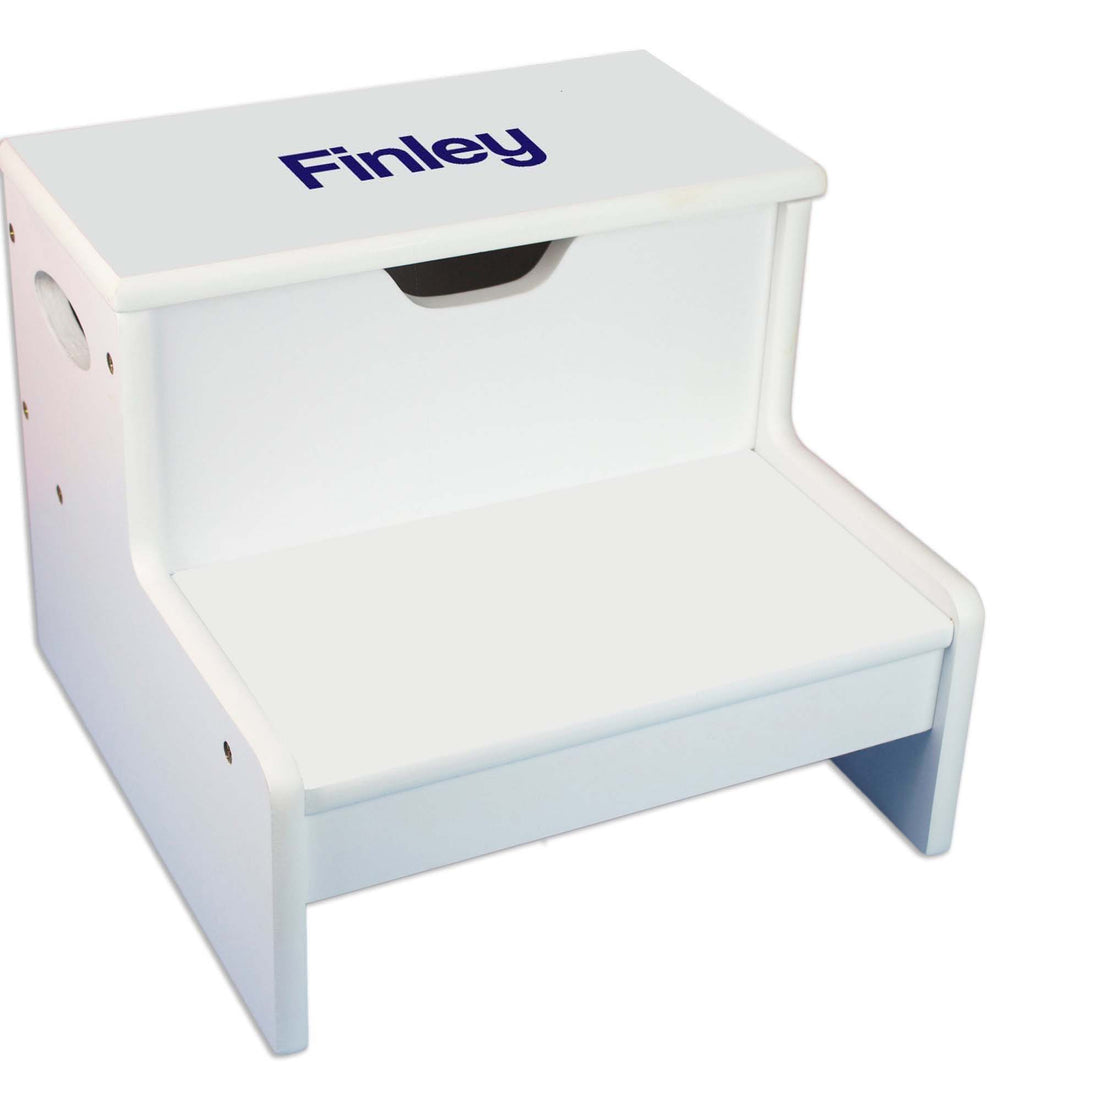 Personalized Personalized White Storage Step Stool - Name Only